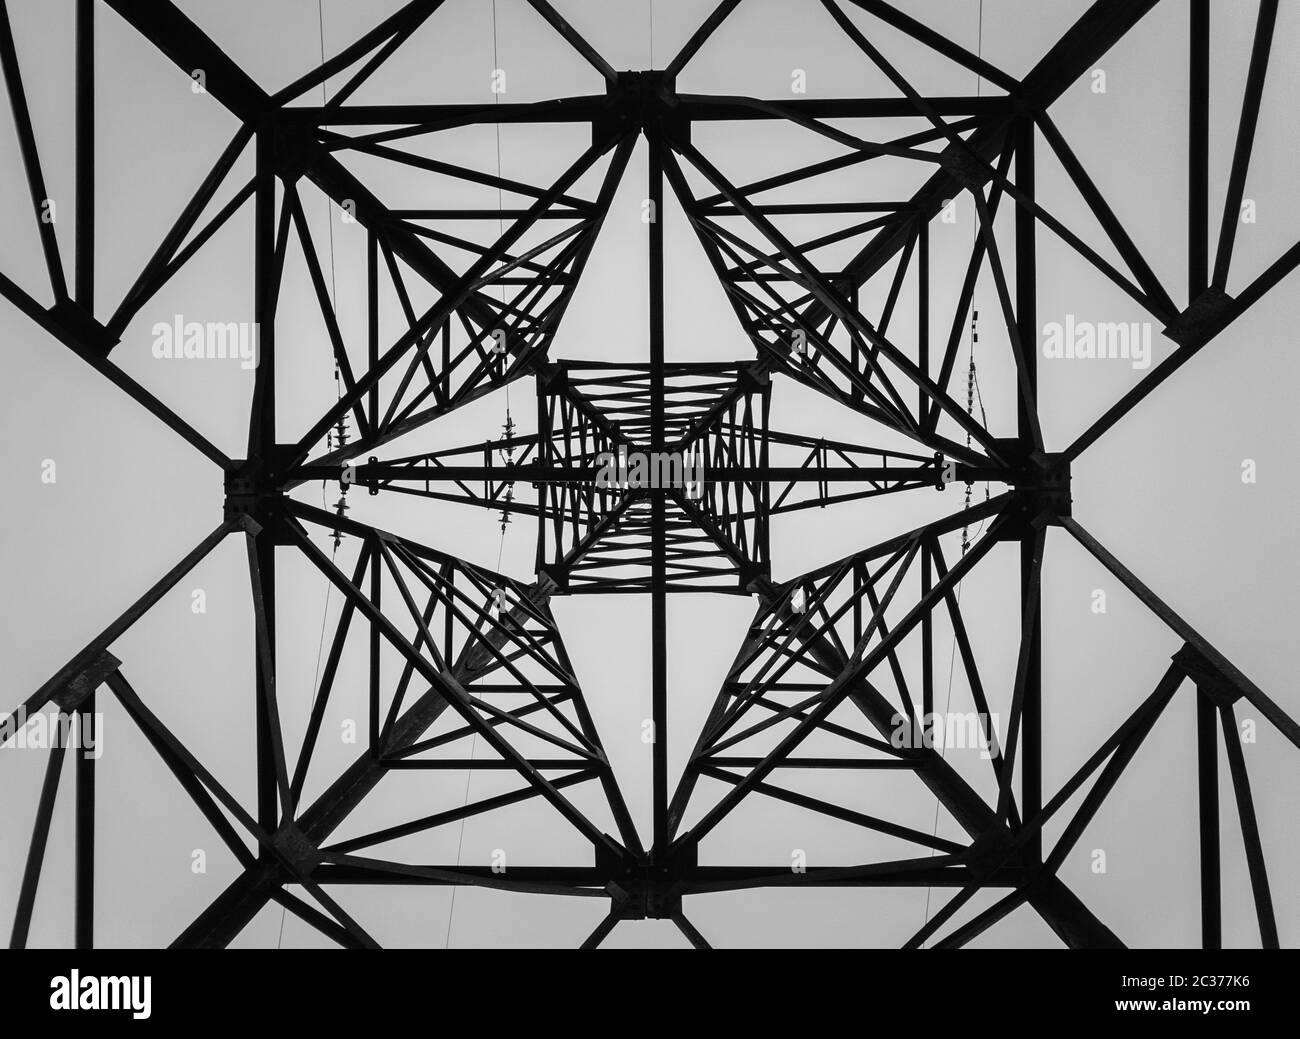 Underneath a truss pillar construction. Different geometric shapes, patterns of a steel structure. Metallic texture of an electricity pole. Stock Photo